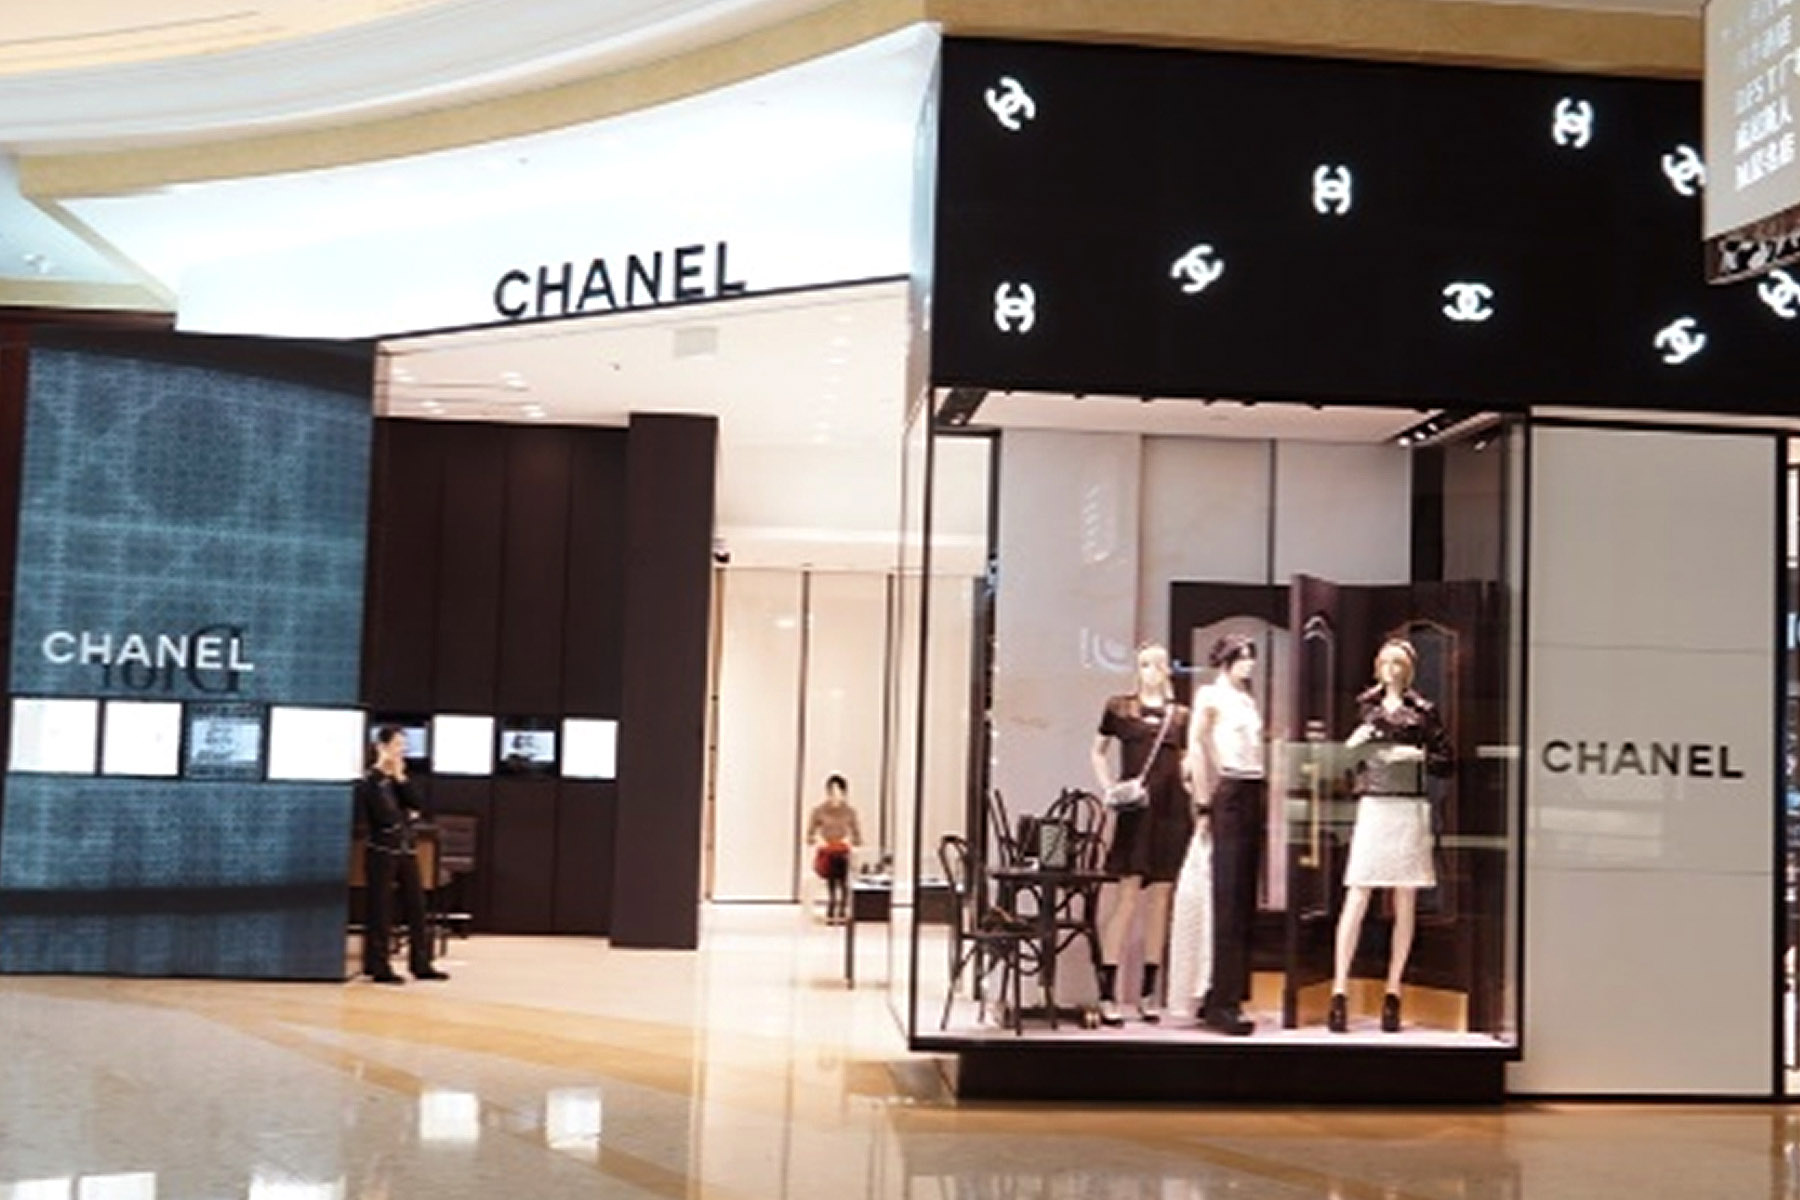 CHANEL at The Galleria  A Shopping Center in Houston TX  A Simon Property